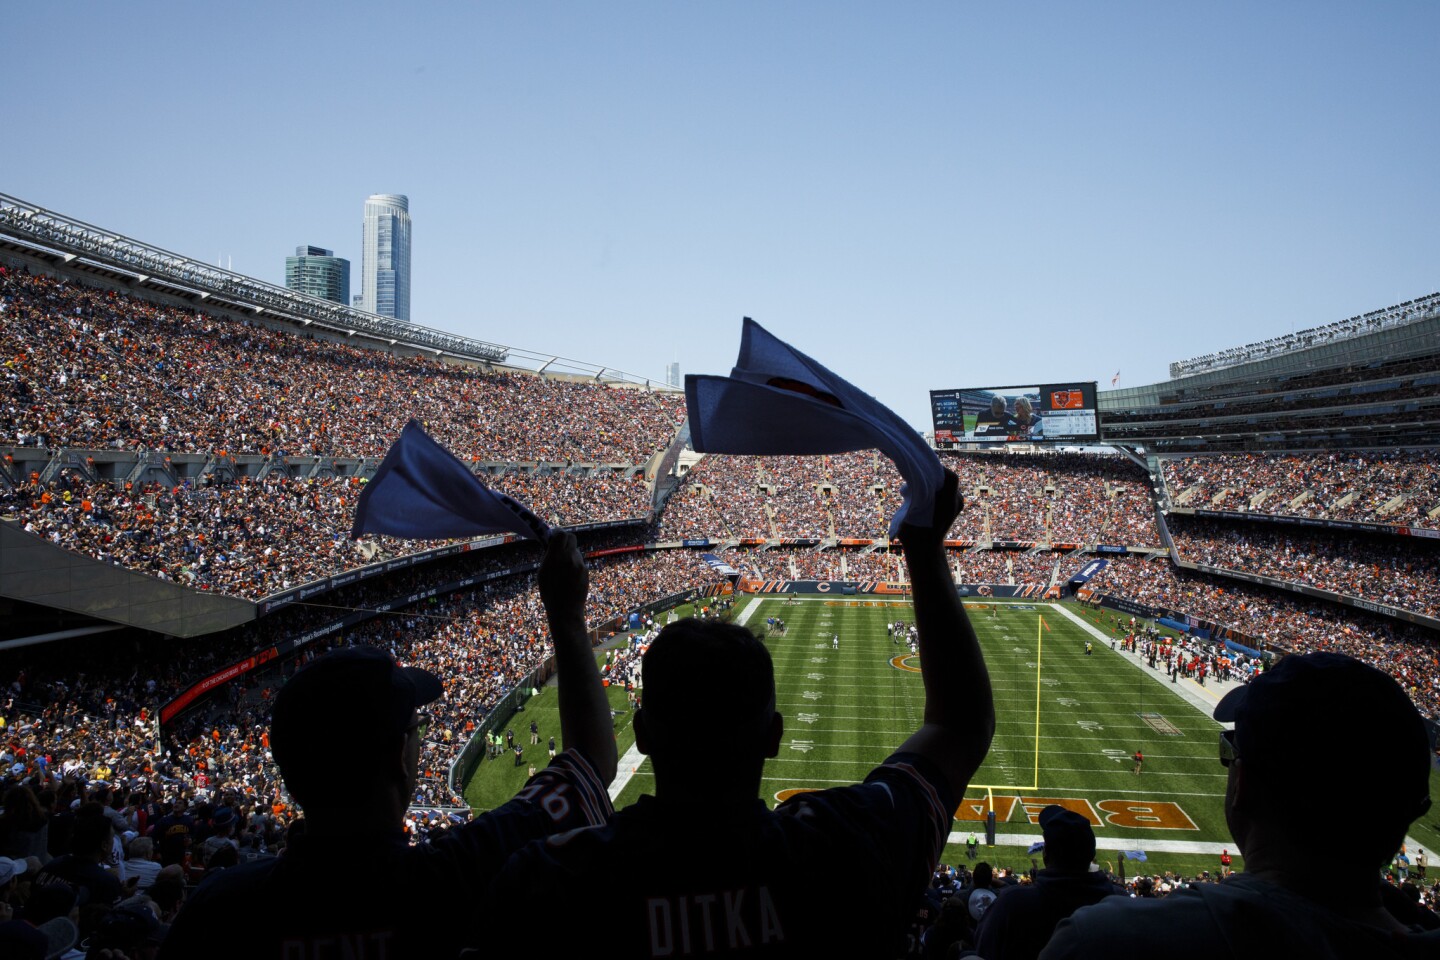 James Durkin, of Edgebrook, said he reimbursed his United Airlines miles for skybox seats at a Bears game.